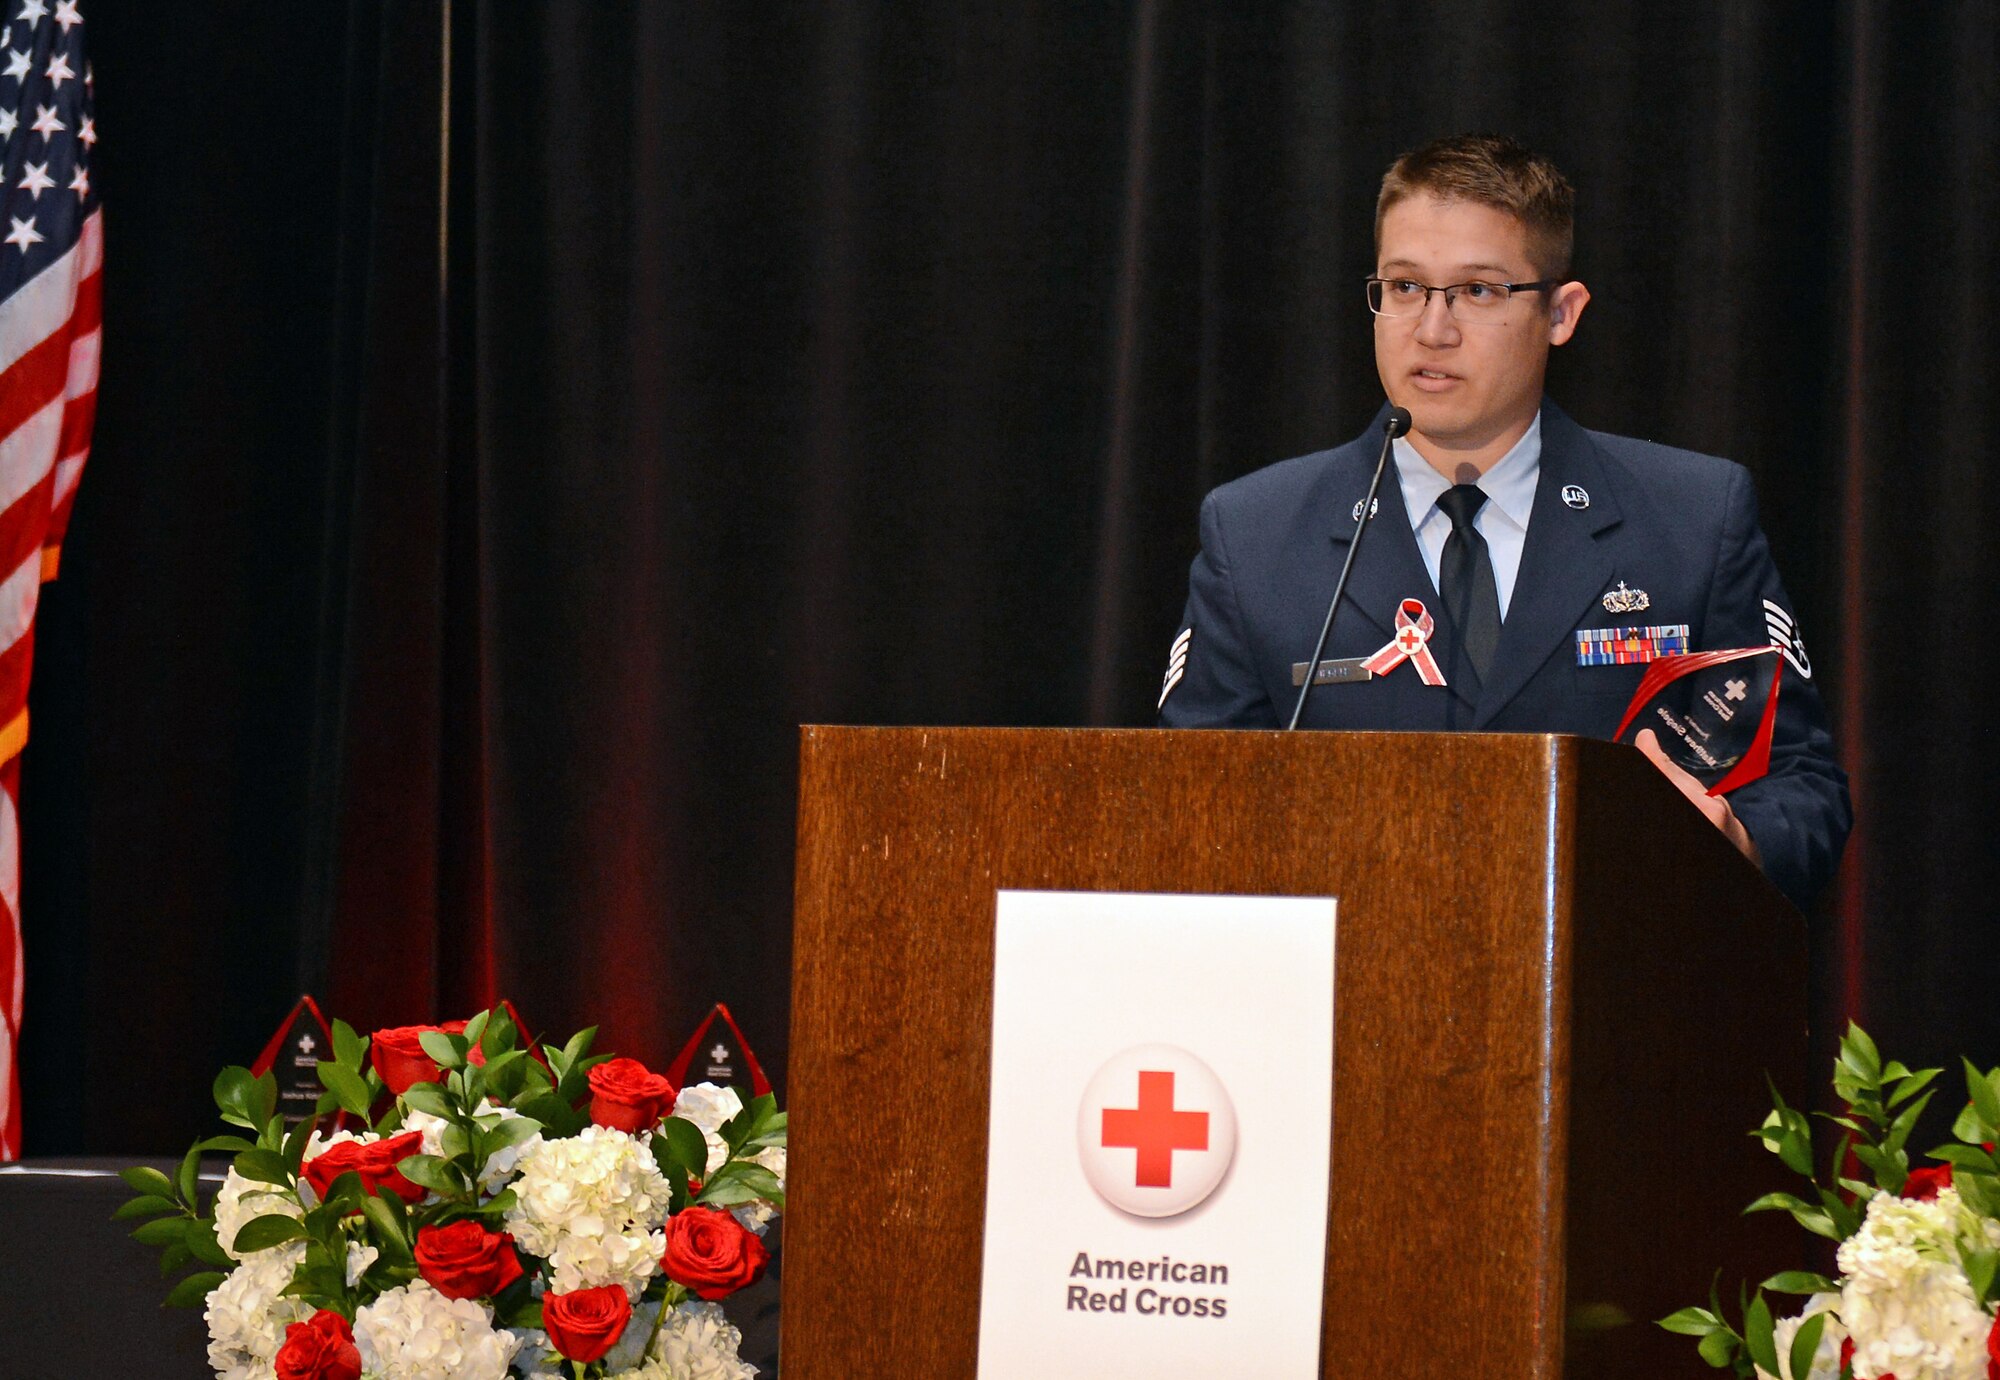 Staff Sgt. Matthew Siegele, 627th Force Support Squadron sports and fitness NCO in charge, gives a speech during the American Red Cross 2016 Heroes luncheon Sept. 28, 2016 in Tacoma, Wash. Siegele was the first of six individuals to be recognized at the annual Heroes event. (U.S. Air Force photo/Senior Airman Divine Cox)